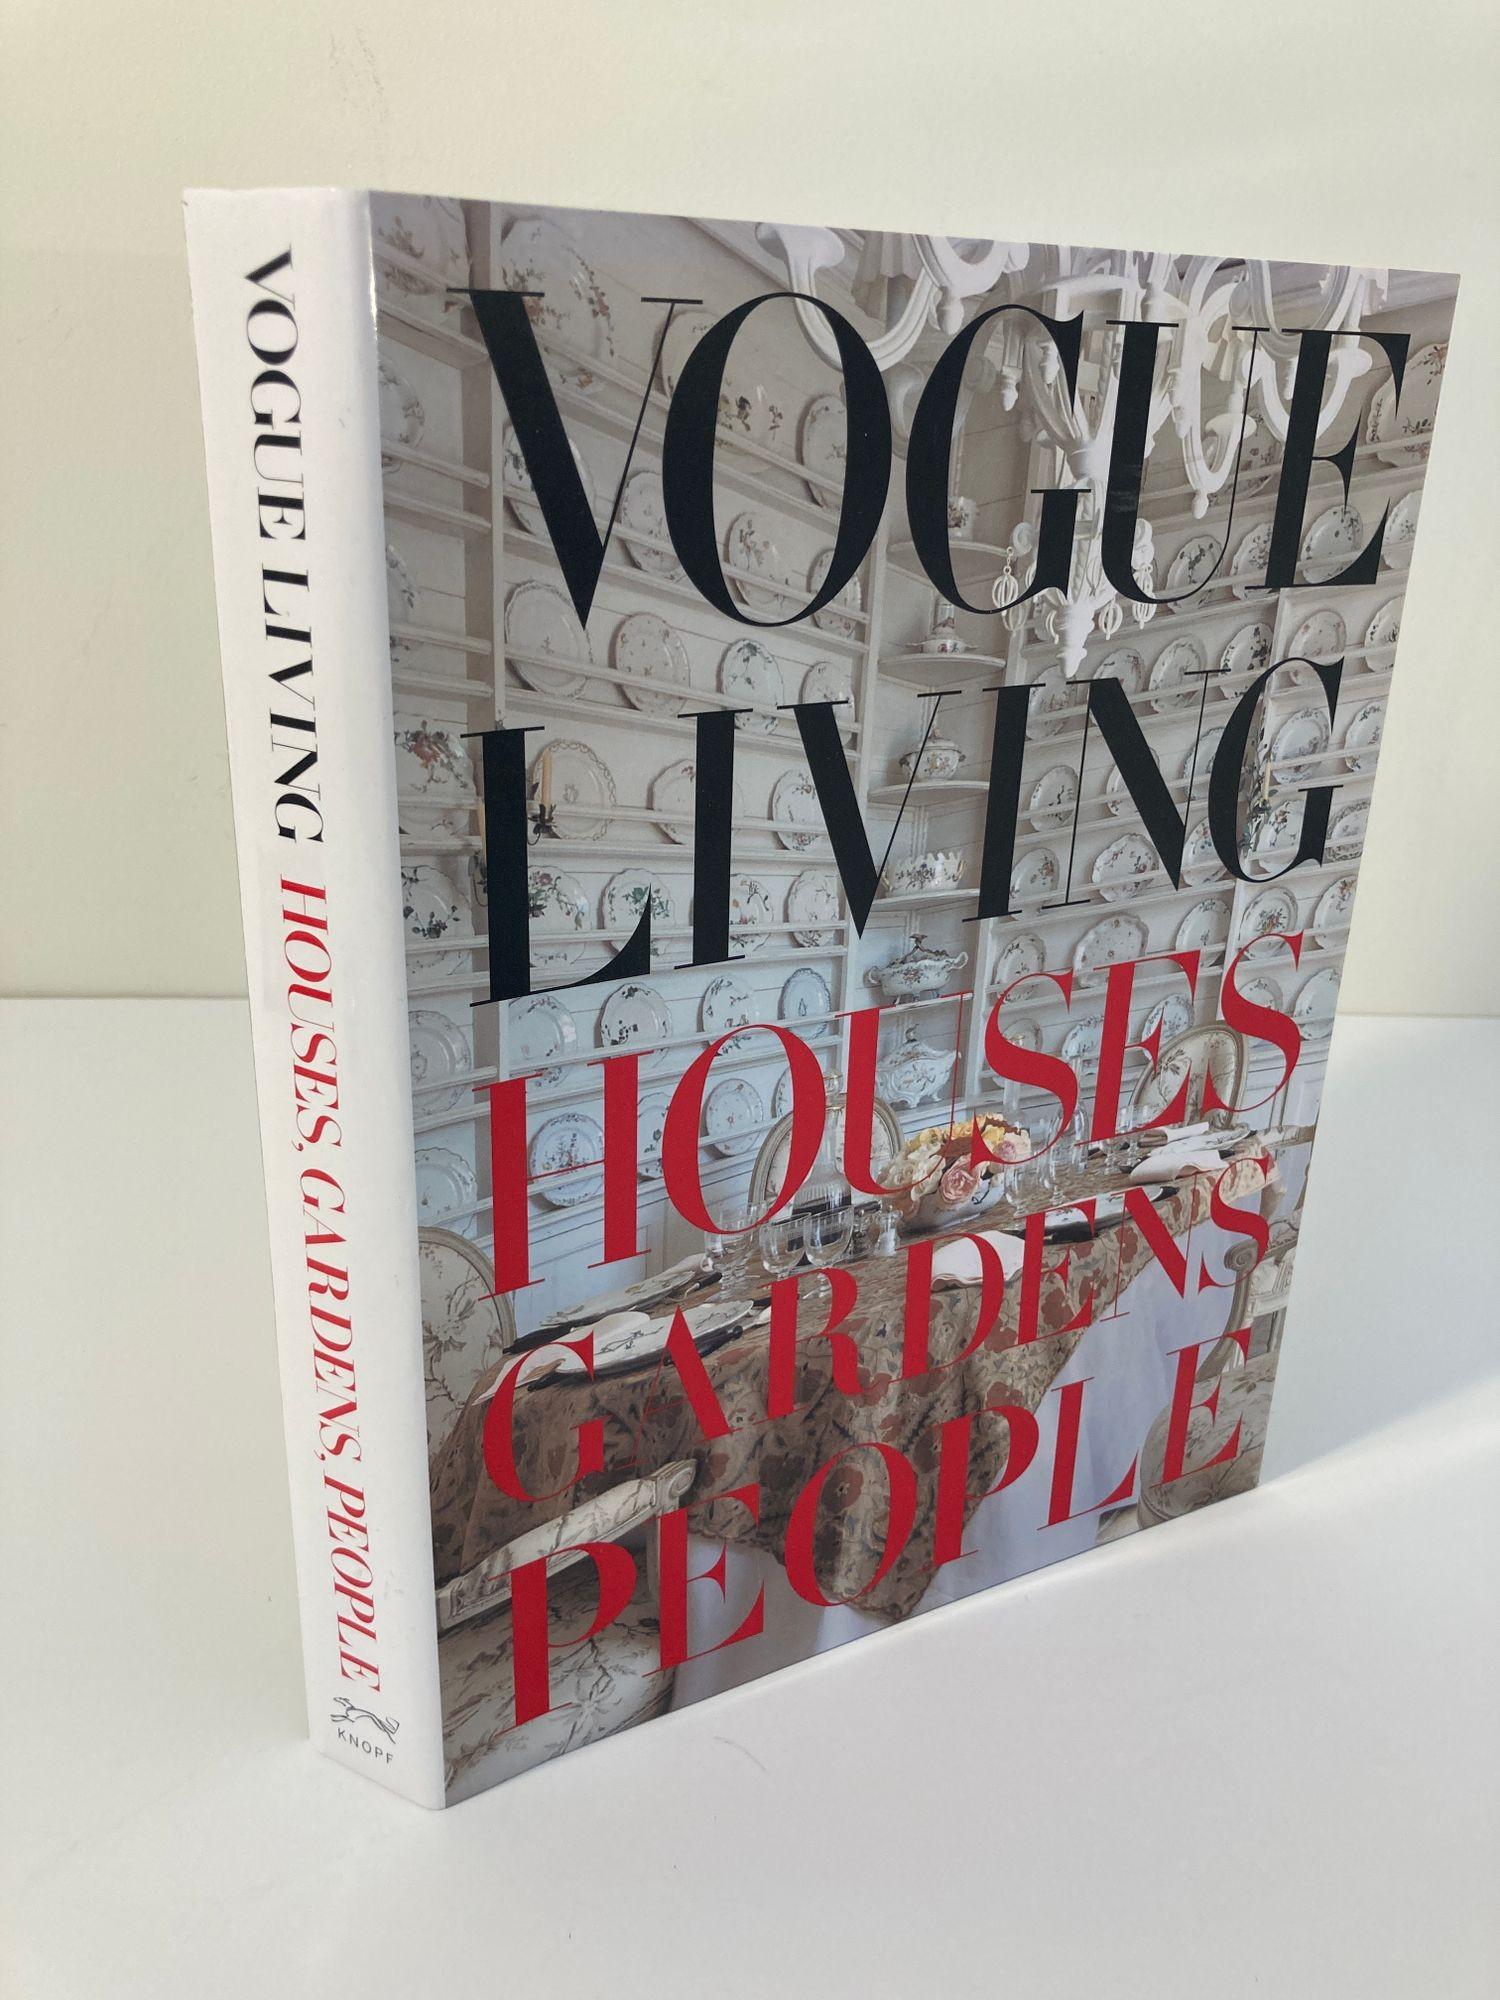 Vogue Living: Houses, Gardens, People. hardcover large coffee table book.
“Vogue Living Houses Gardens People” book by Hamish Bowles. New York: Alfred A. Knopf, 2007.
Stated first edition hardcover with dust jacket. 400 pp. A beautiful coffee